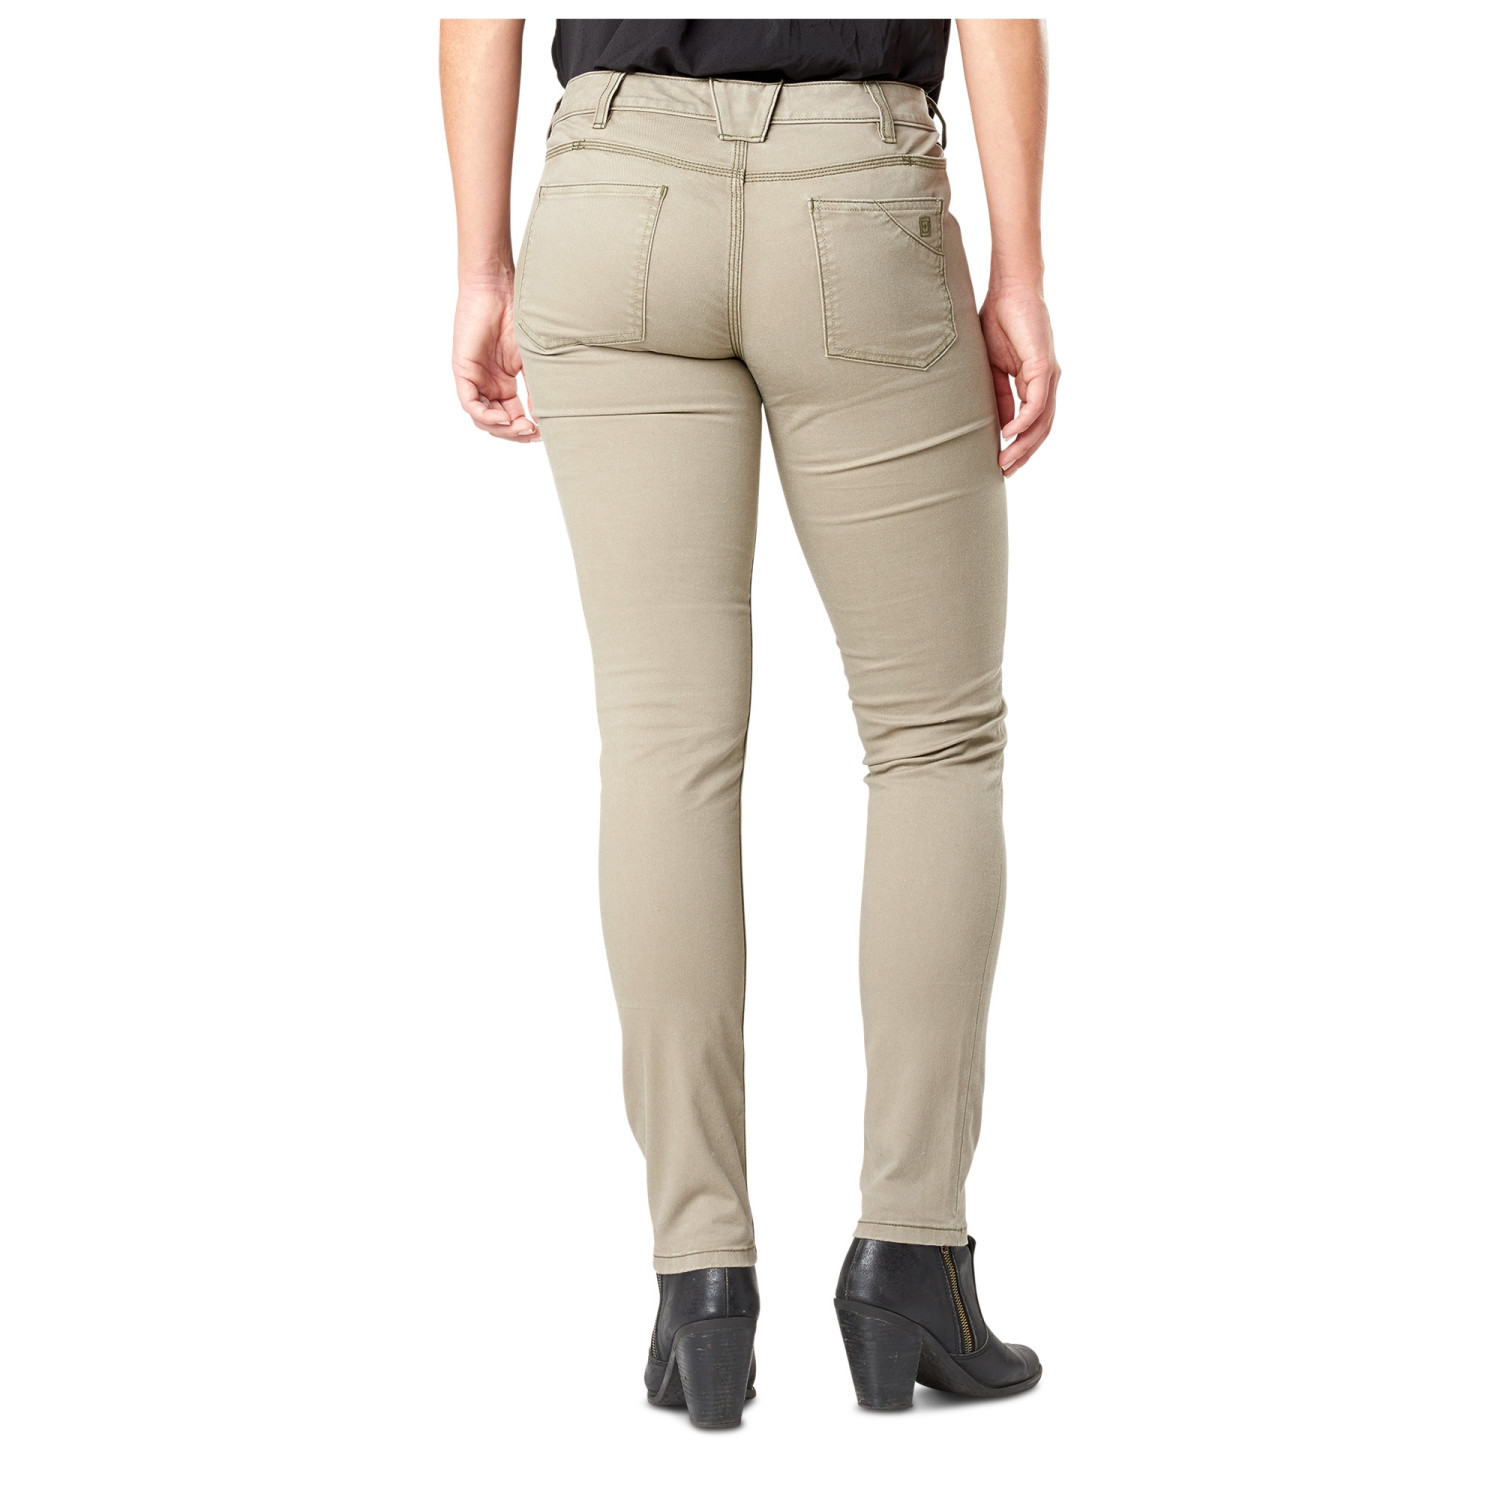 Style 64415 5.11 Tactical Womens Cavalry Twill Defender-Flex Slim Pants Device Ready Pockets